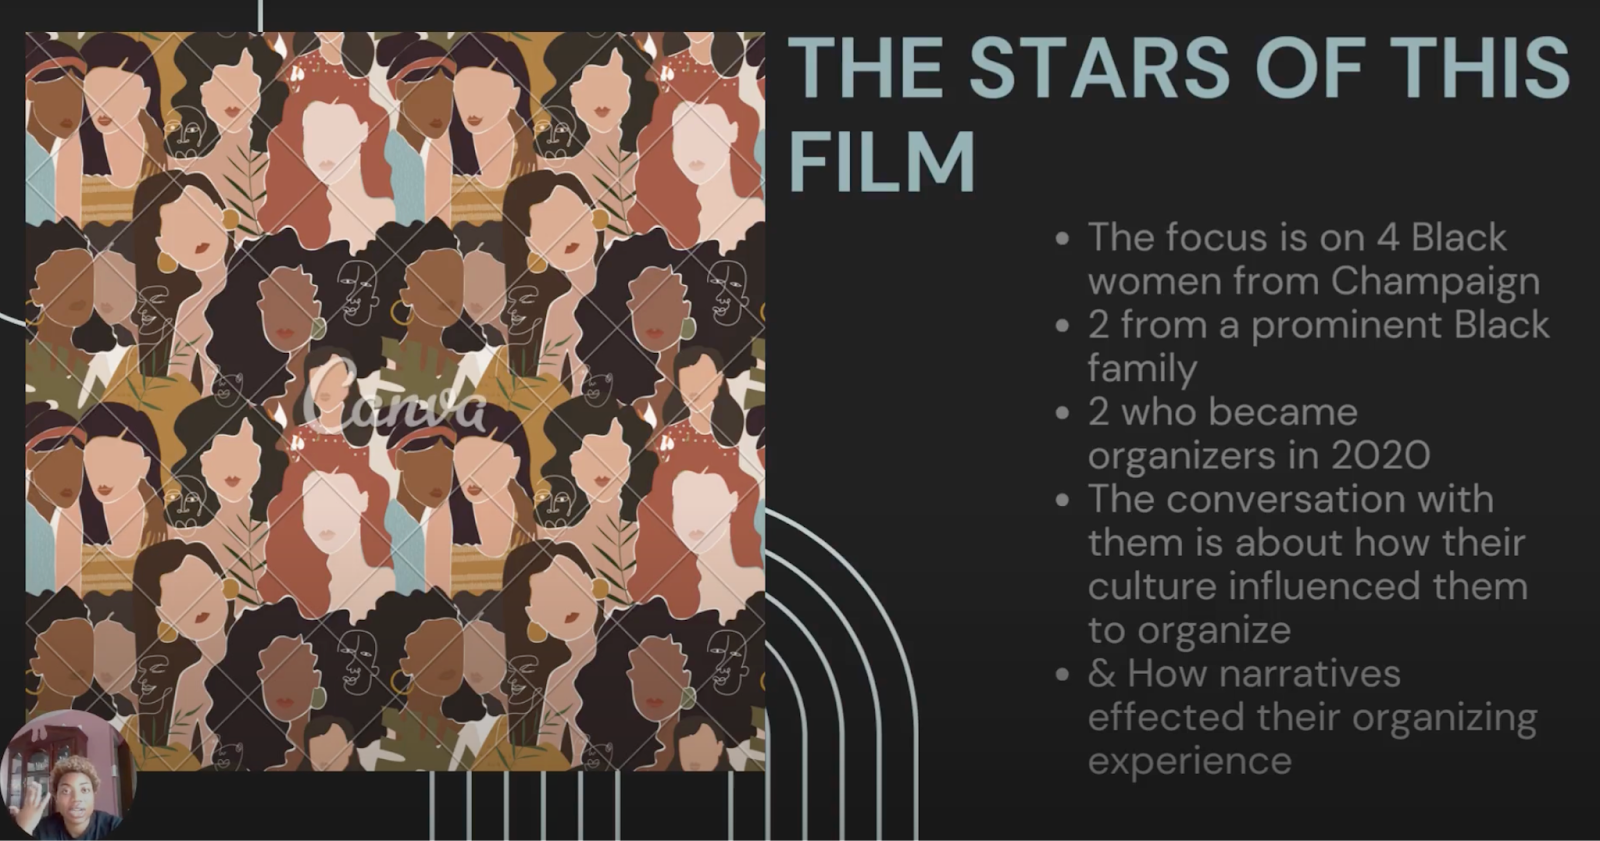 SCREENSHOT: From Bria's short documentary presentation. at left is a graphic of many multiracial femme faces, and text on the right reads: "THE STARS OF THIS FILM" 